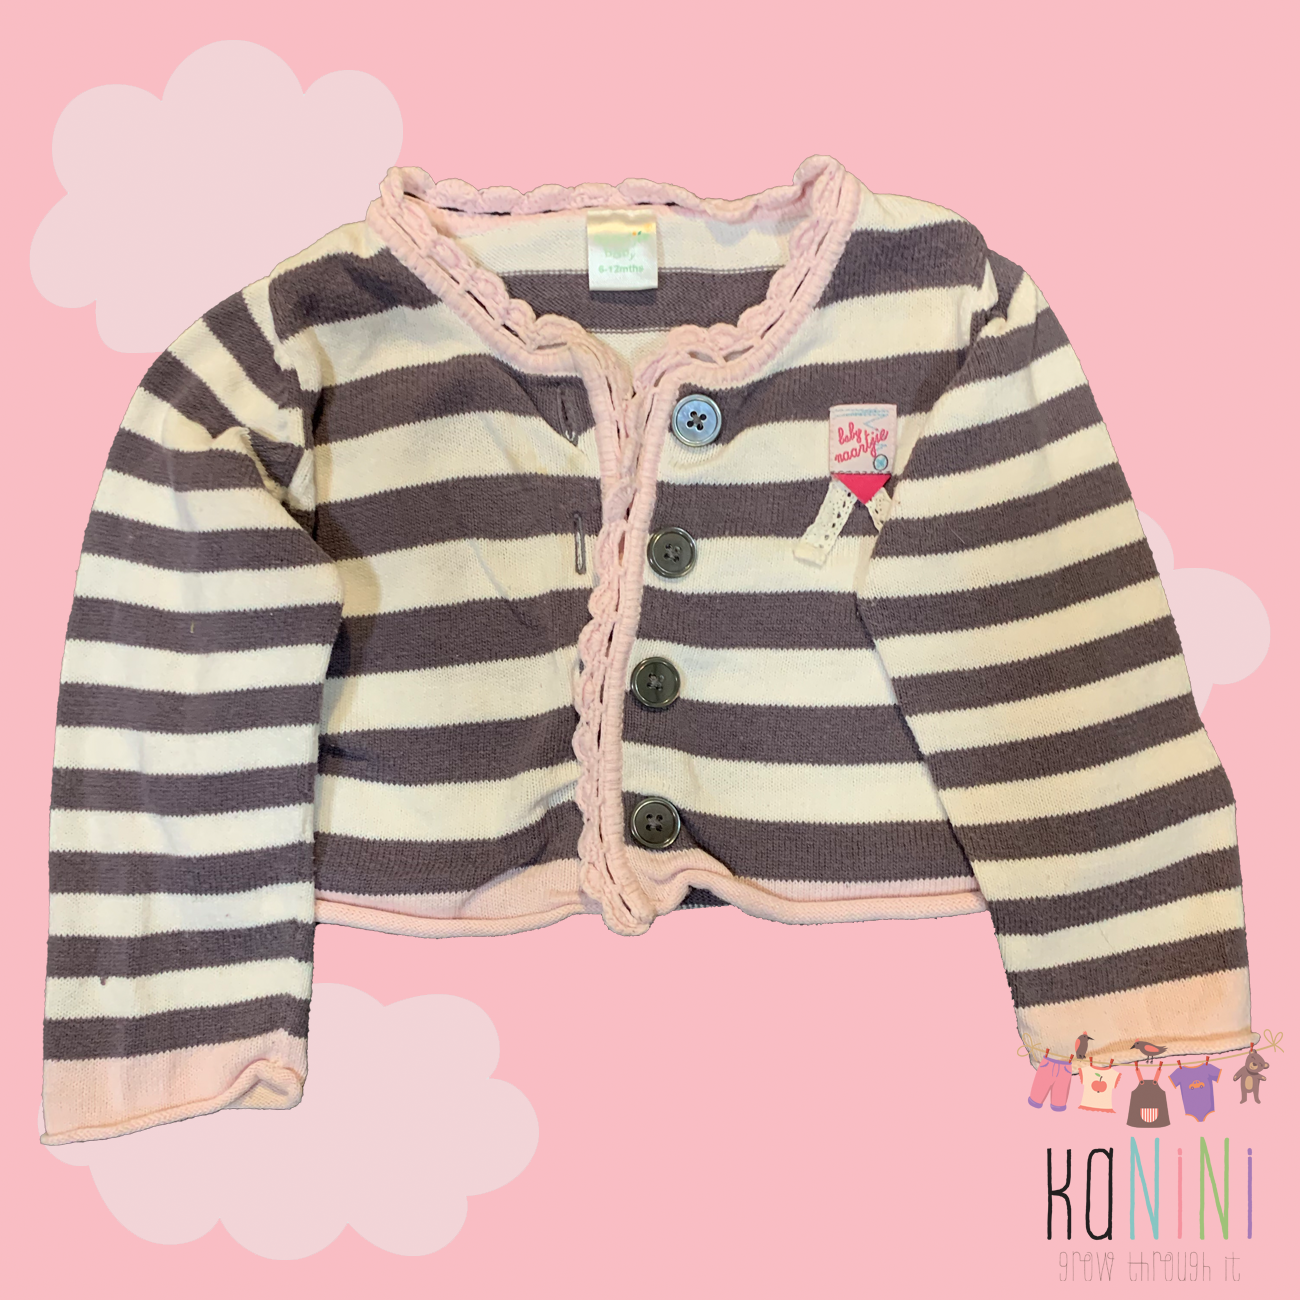 Featured image for “Naartjie 6-12 Months Girls Cardigan”